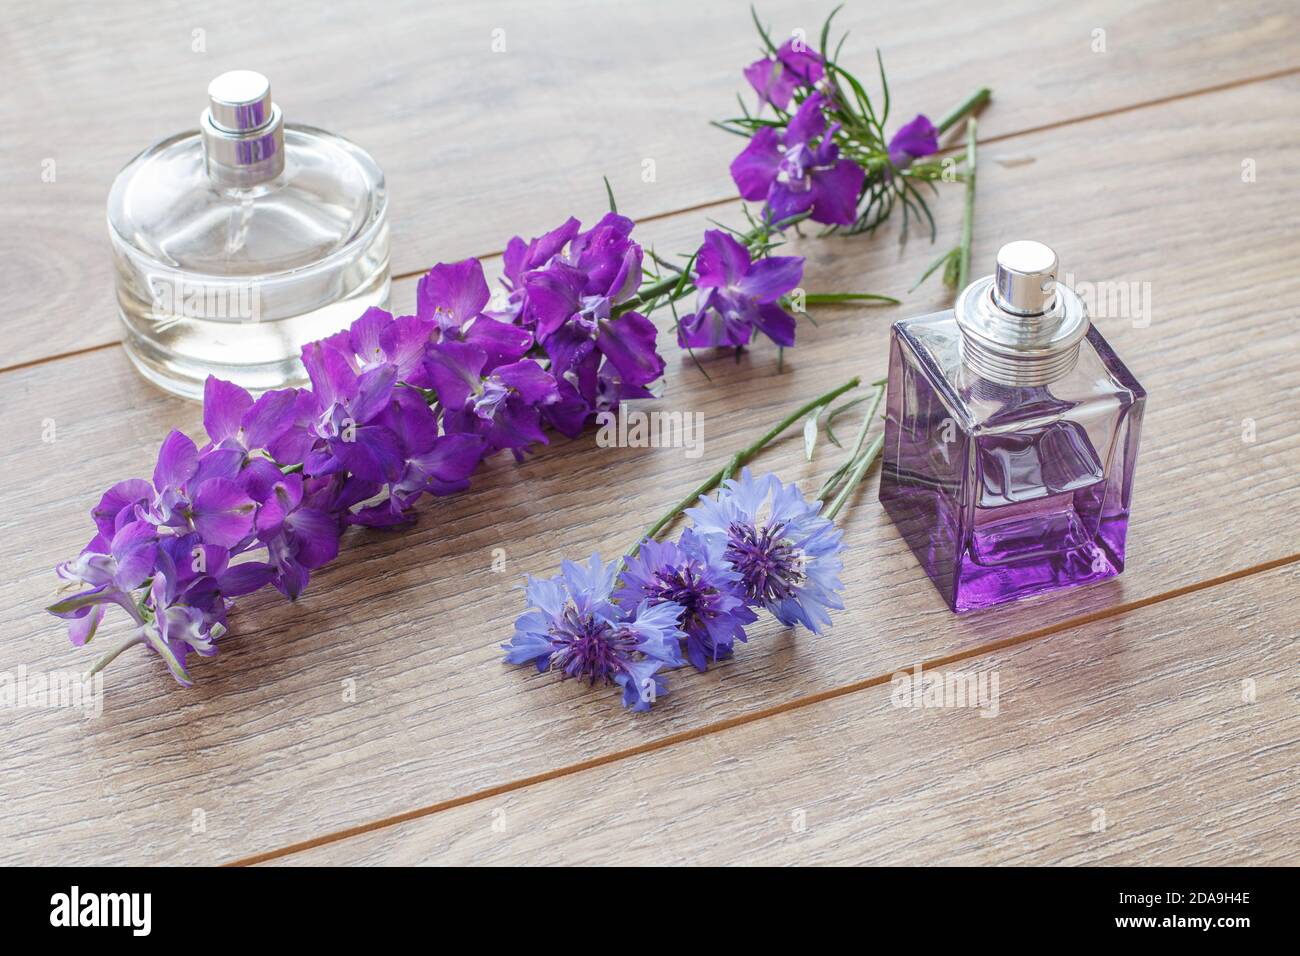 Bottles of perfume with knapweeds flowers on wooden boards. Top view. Stock Photo